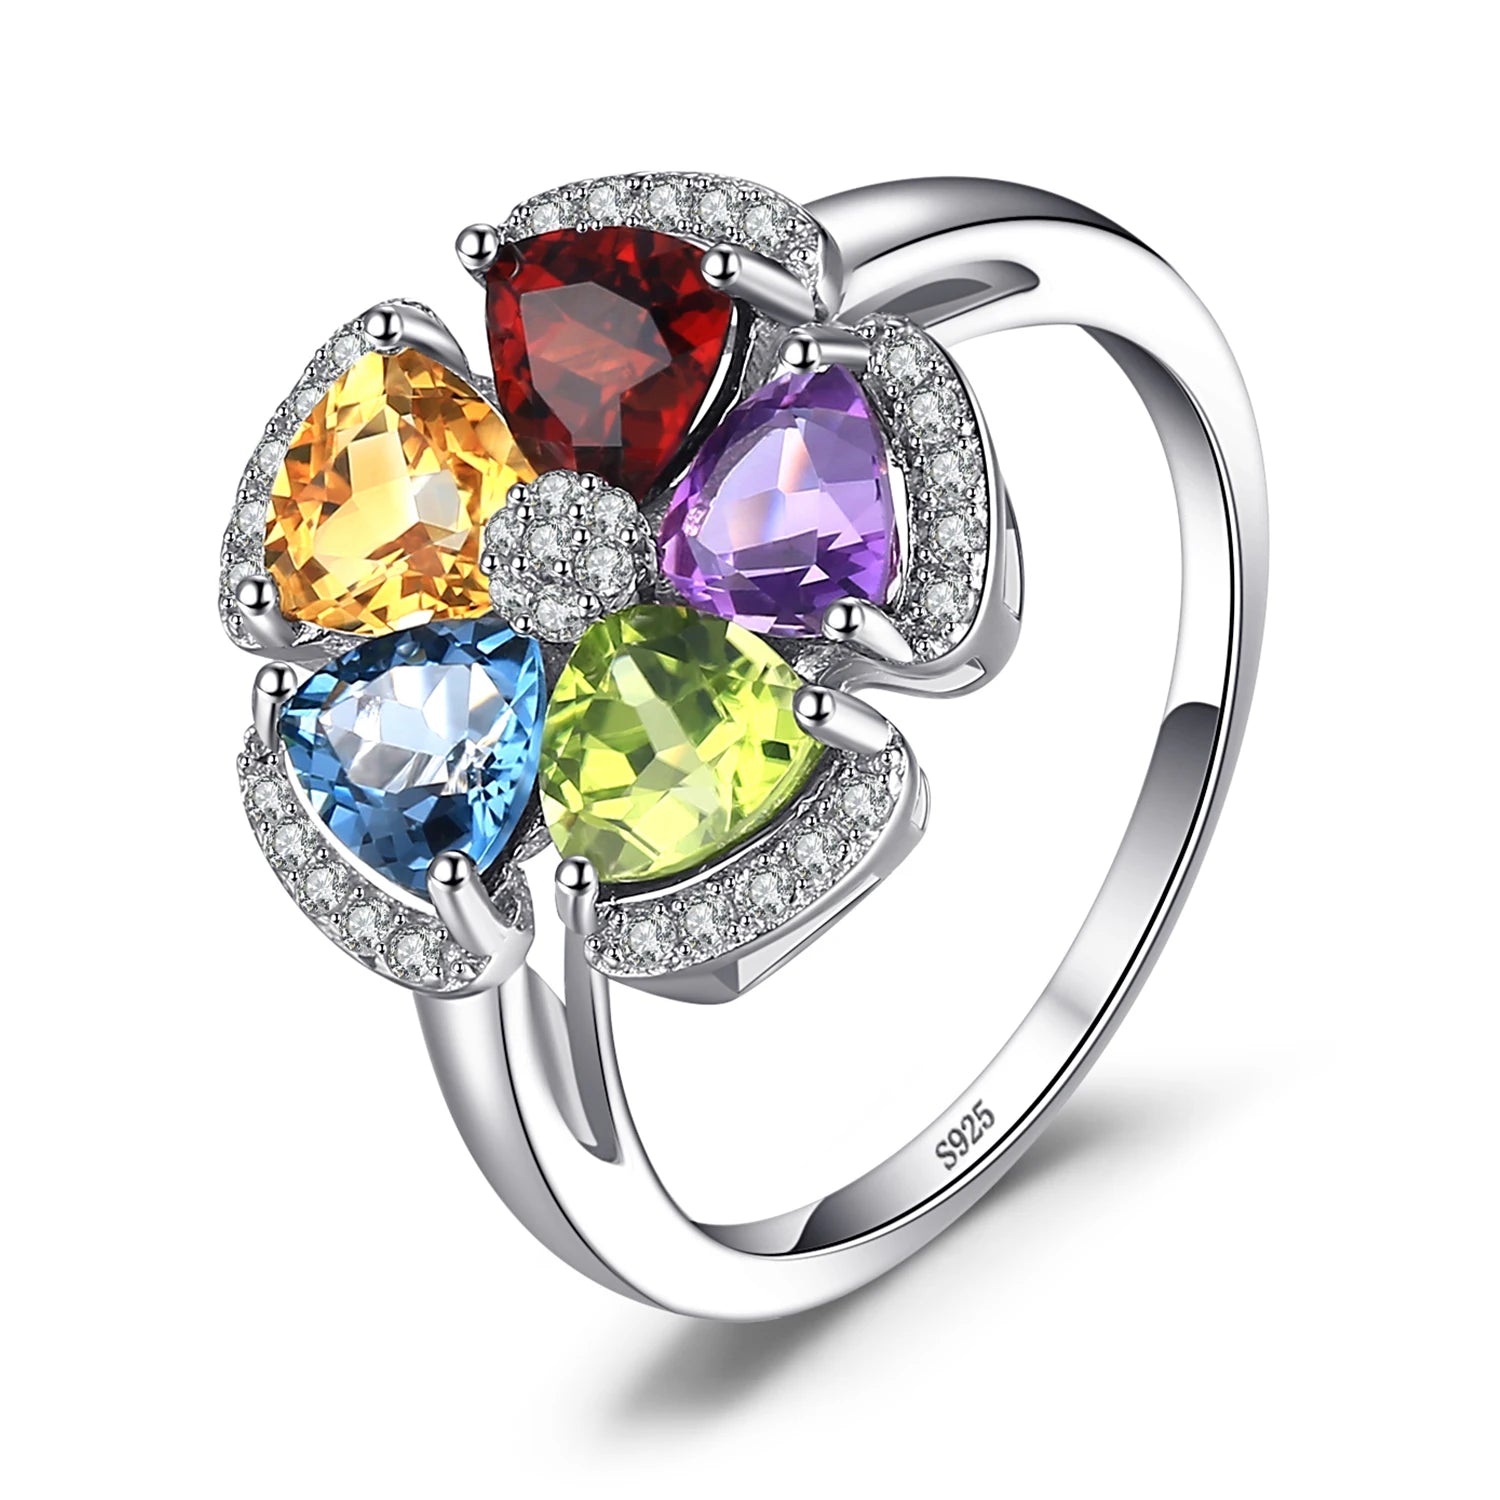 JewelryPalace 2.6ct Genuine Blue Topaz Amethyst Citrine Garnet Peridot Open Adjustable Cocktail Promise Ring 925 Sterling Silver 925 Sterling Silver resizable